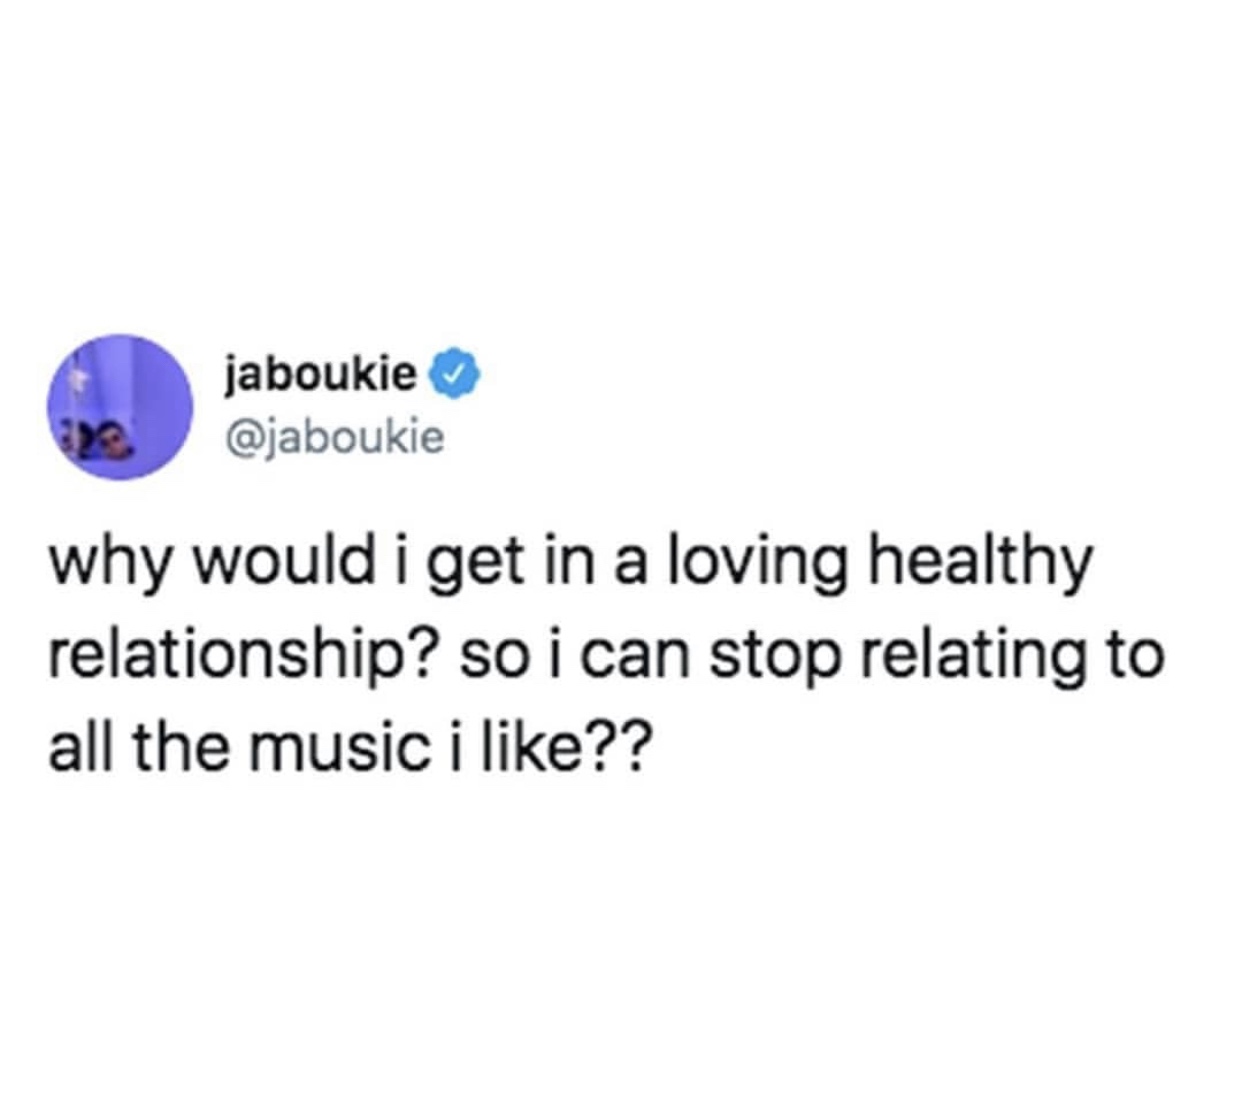 organization - jaboukie why would i get in a loving healthy relationship? so i can stop relating to all the music i ??